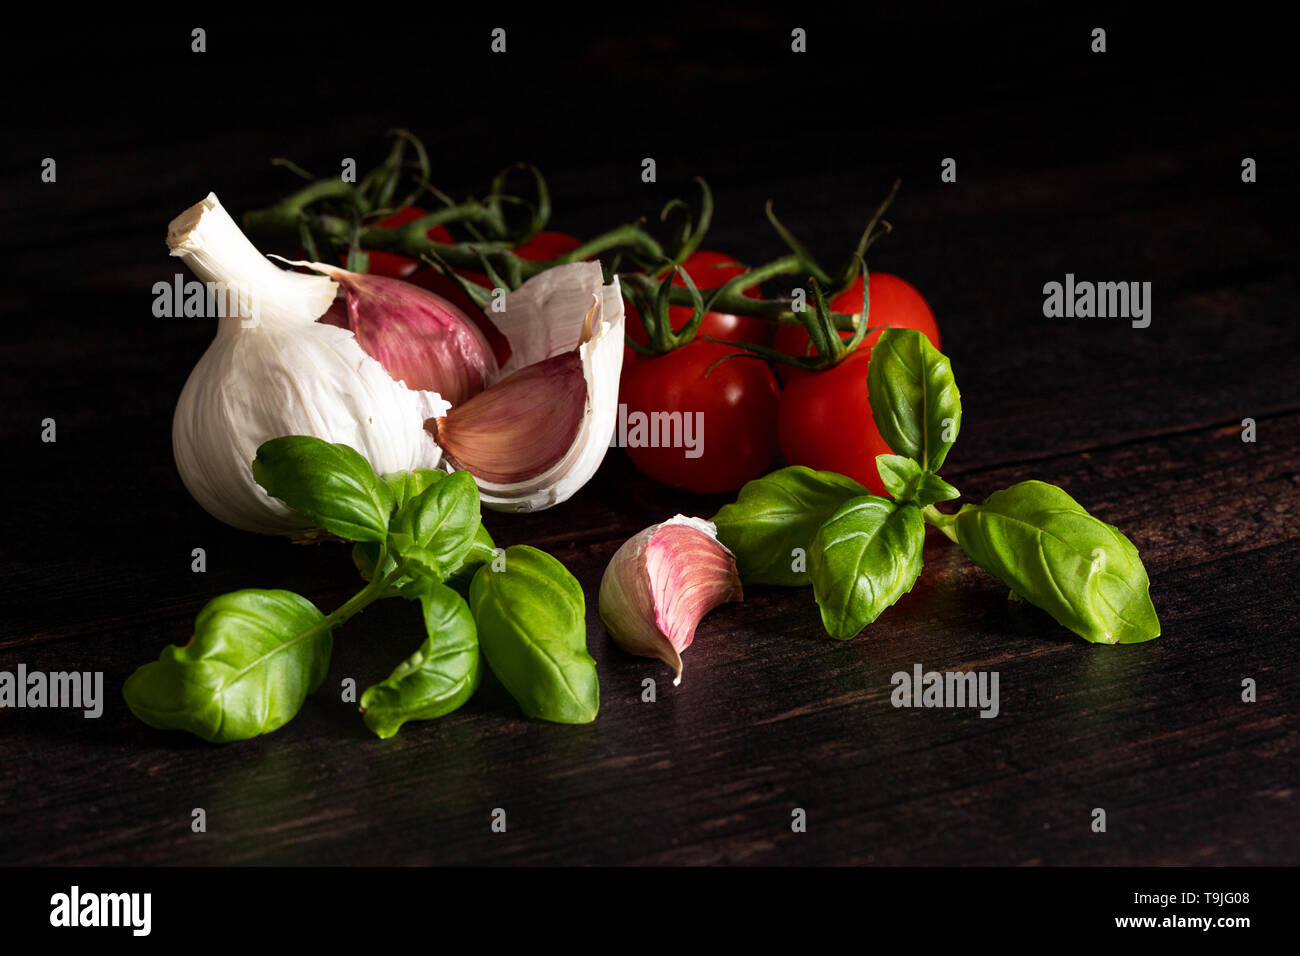 Garlic bulb and cloves with basil and tomatoes on dark board Stock Photo